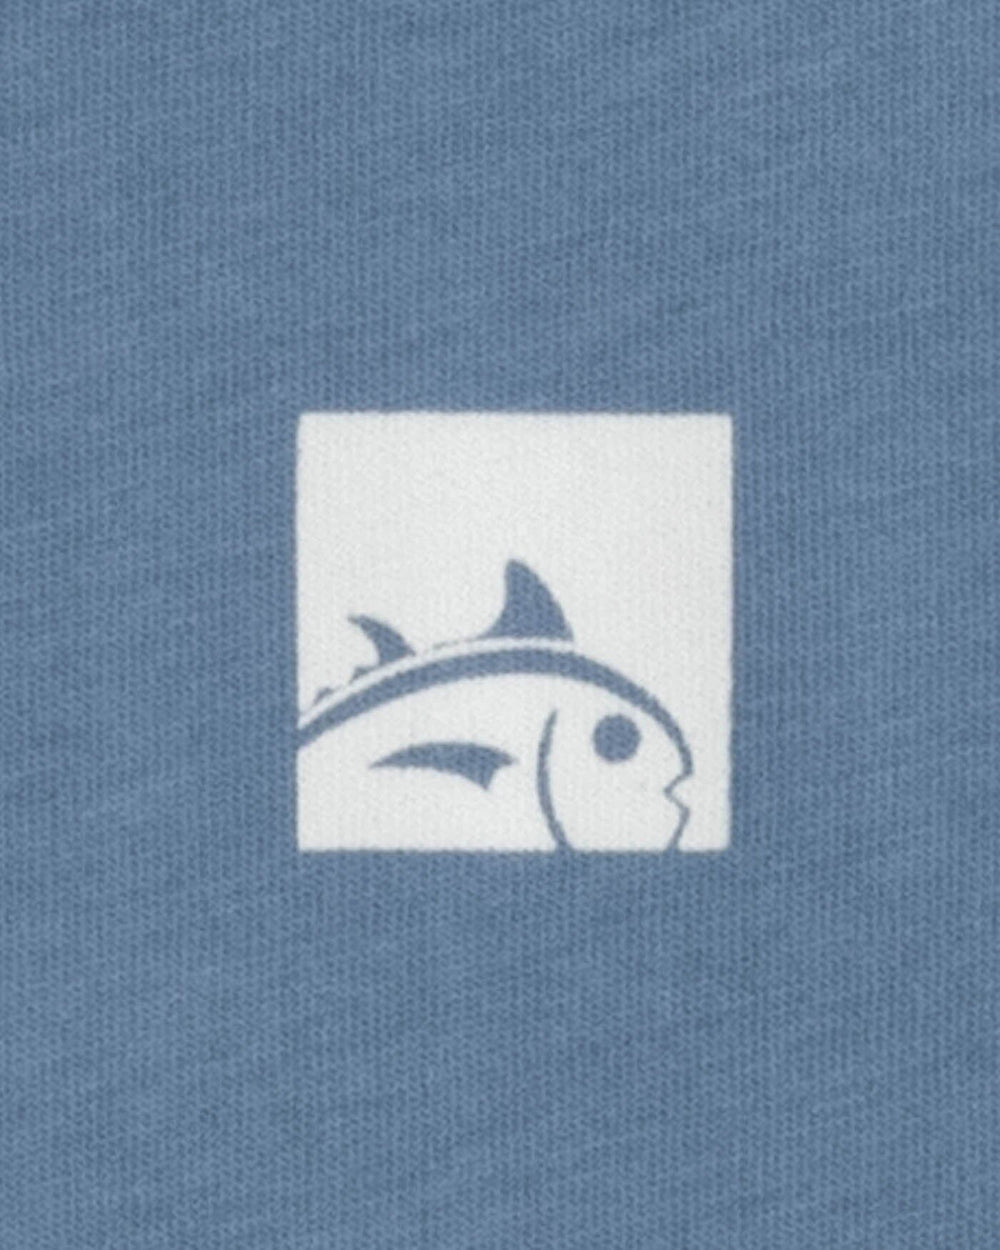 The detail view of the Southern Tide Kids Cropped Skipjack Box Short Sleeve T-Shirt by Southern Tide - Coronet Blue